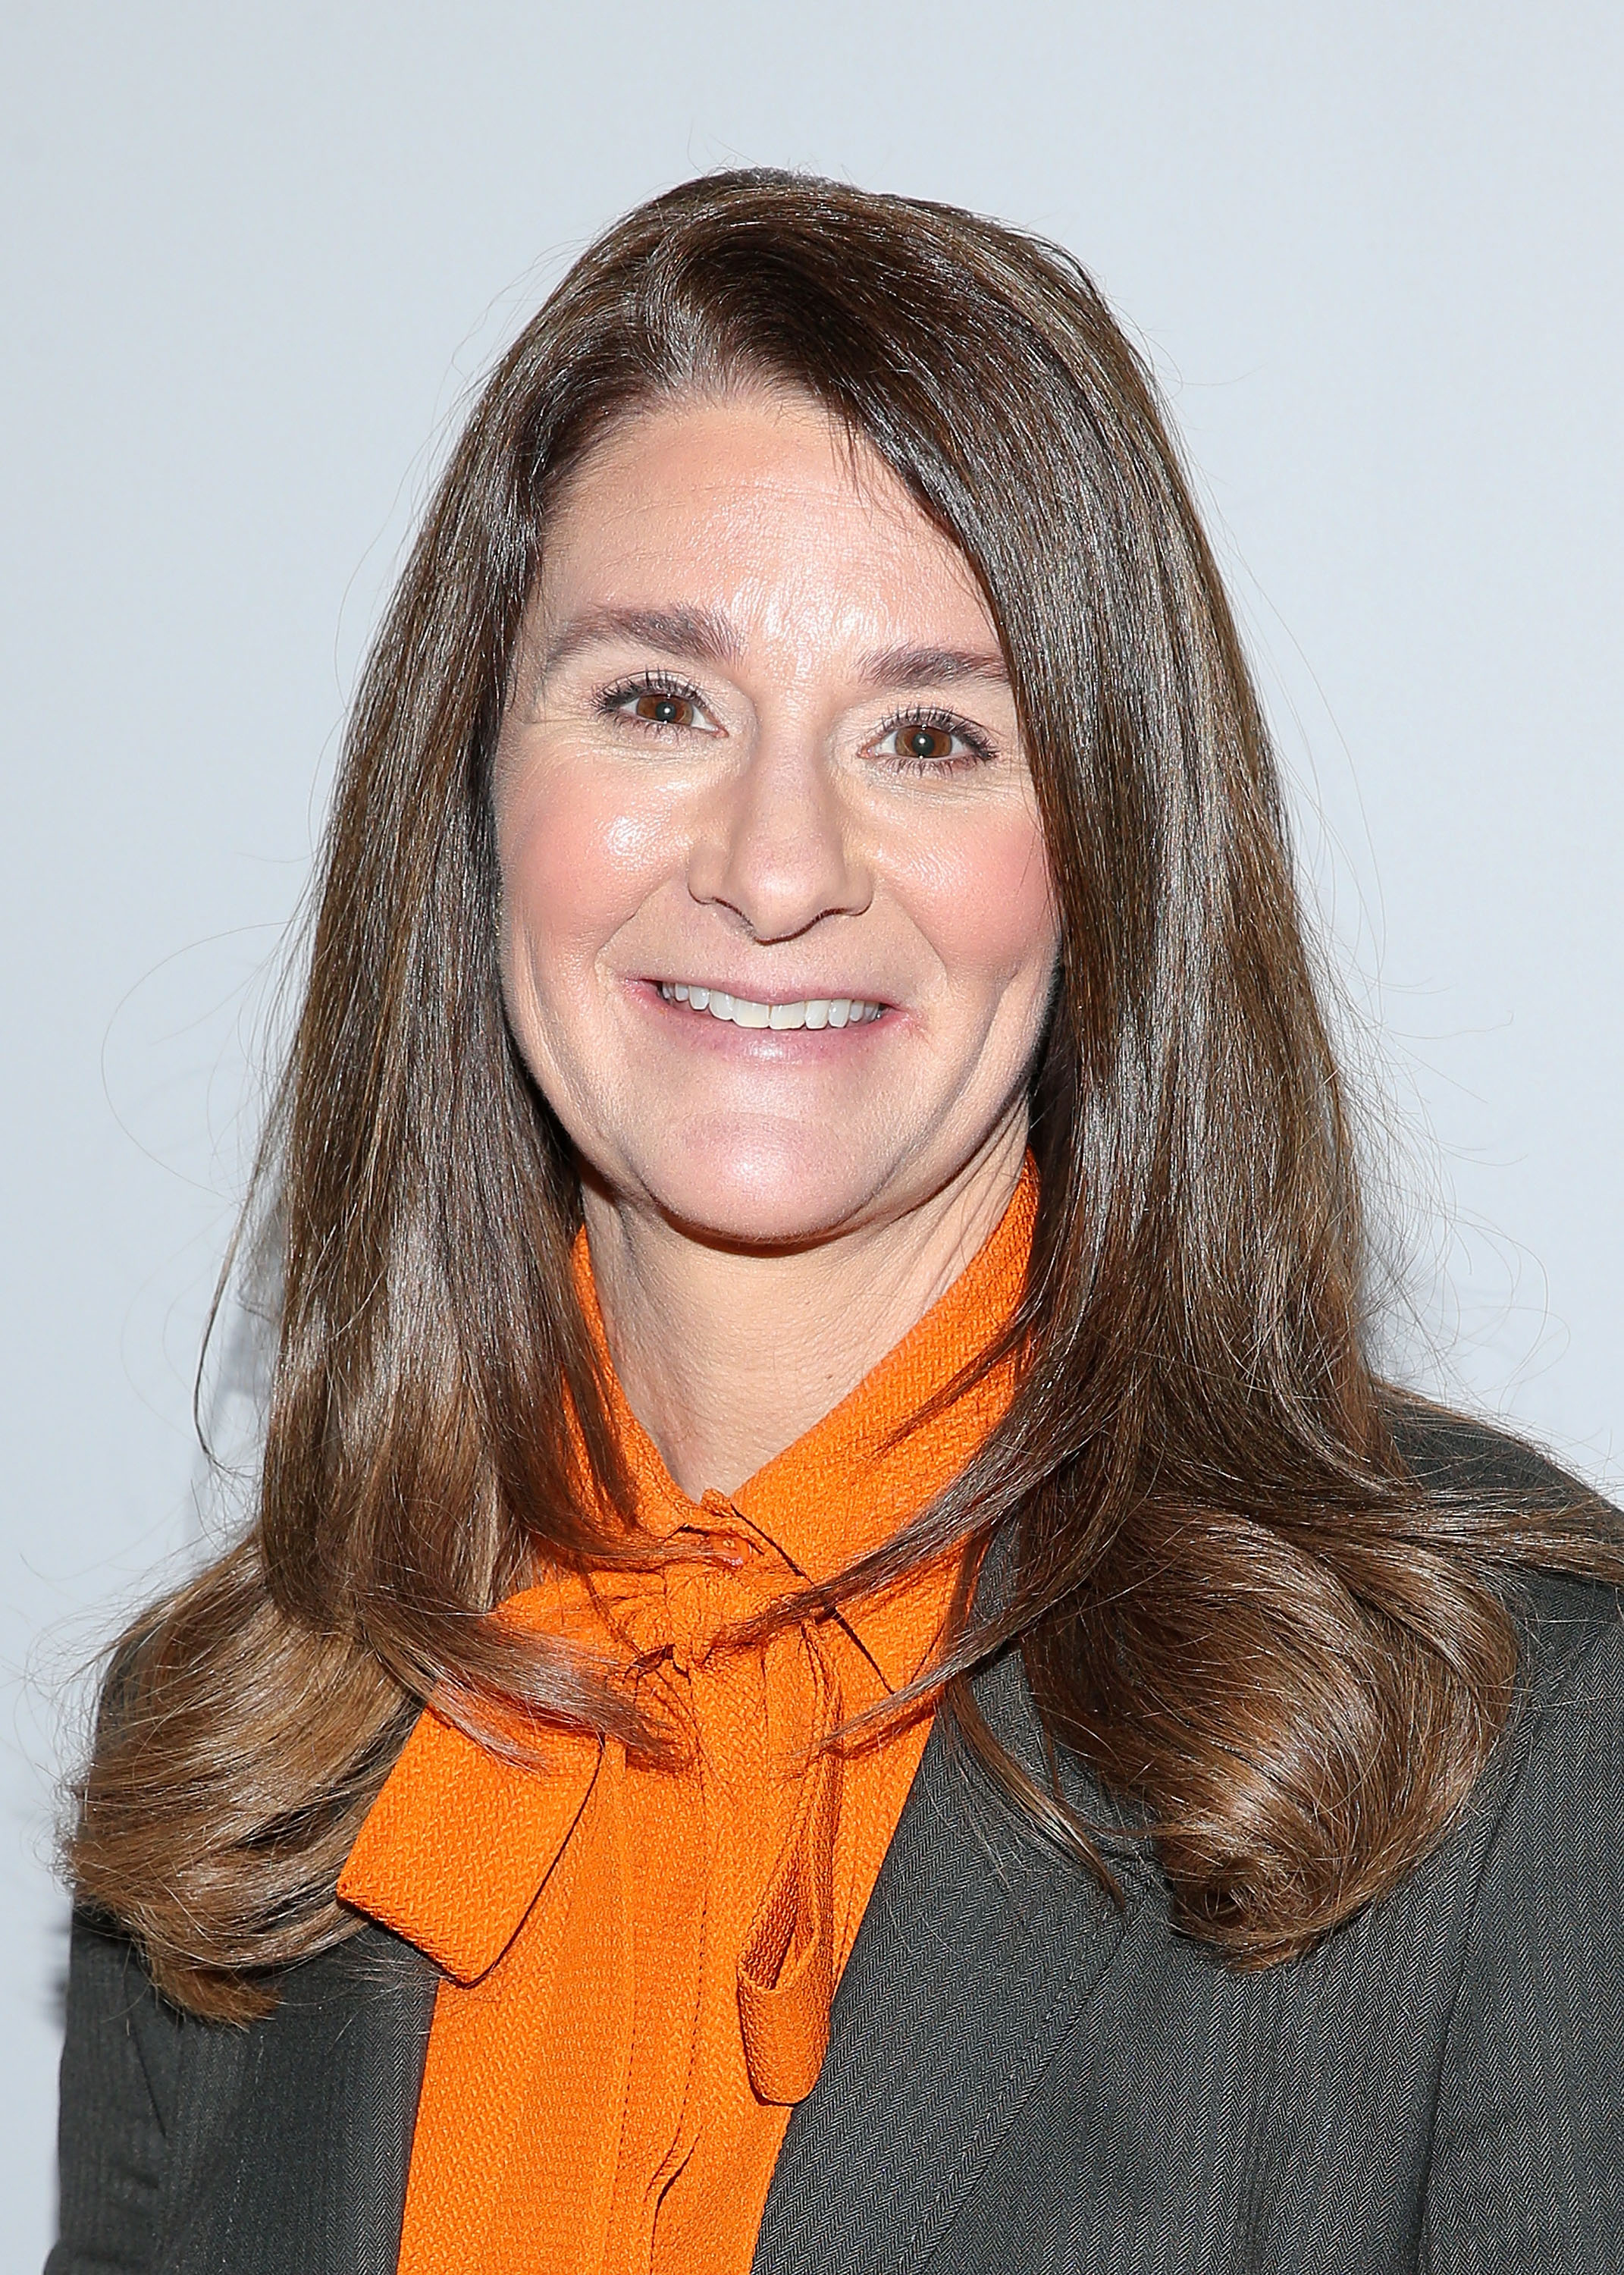 Melinda Gates at the AOL BUILD Speaker Series In New York City on March 10, 2015.